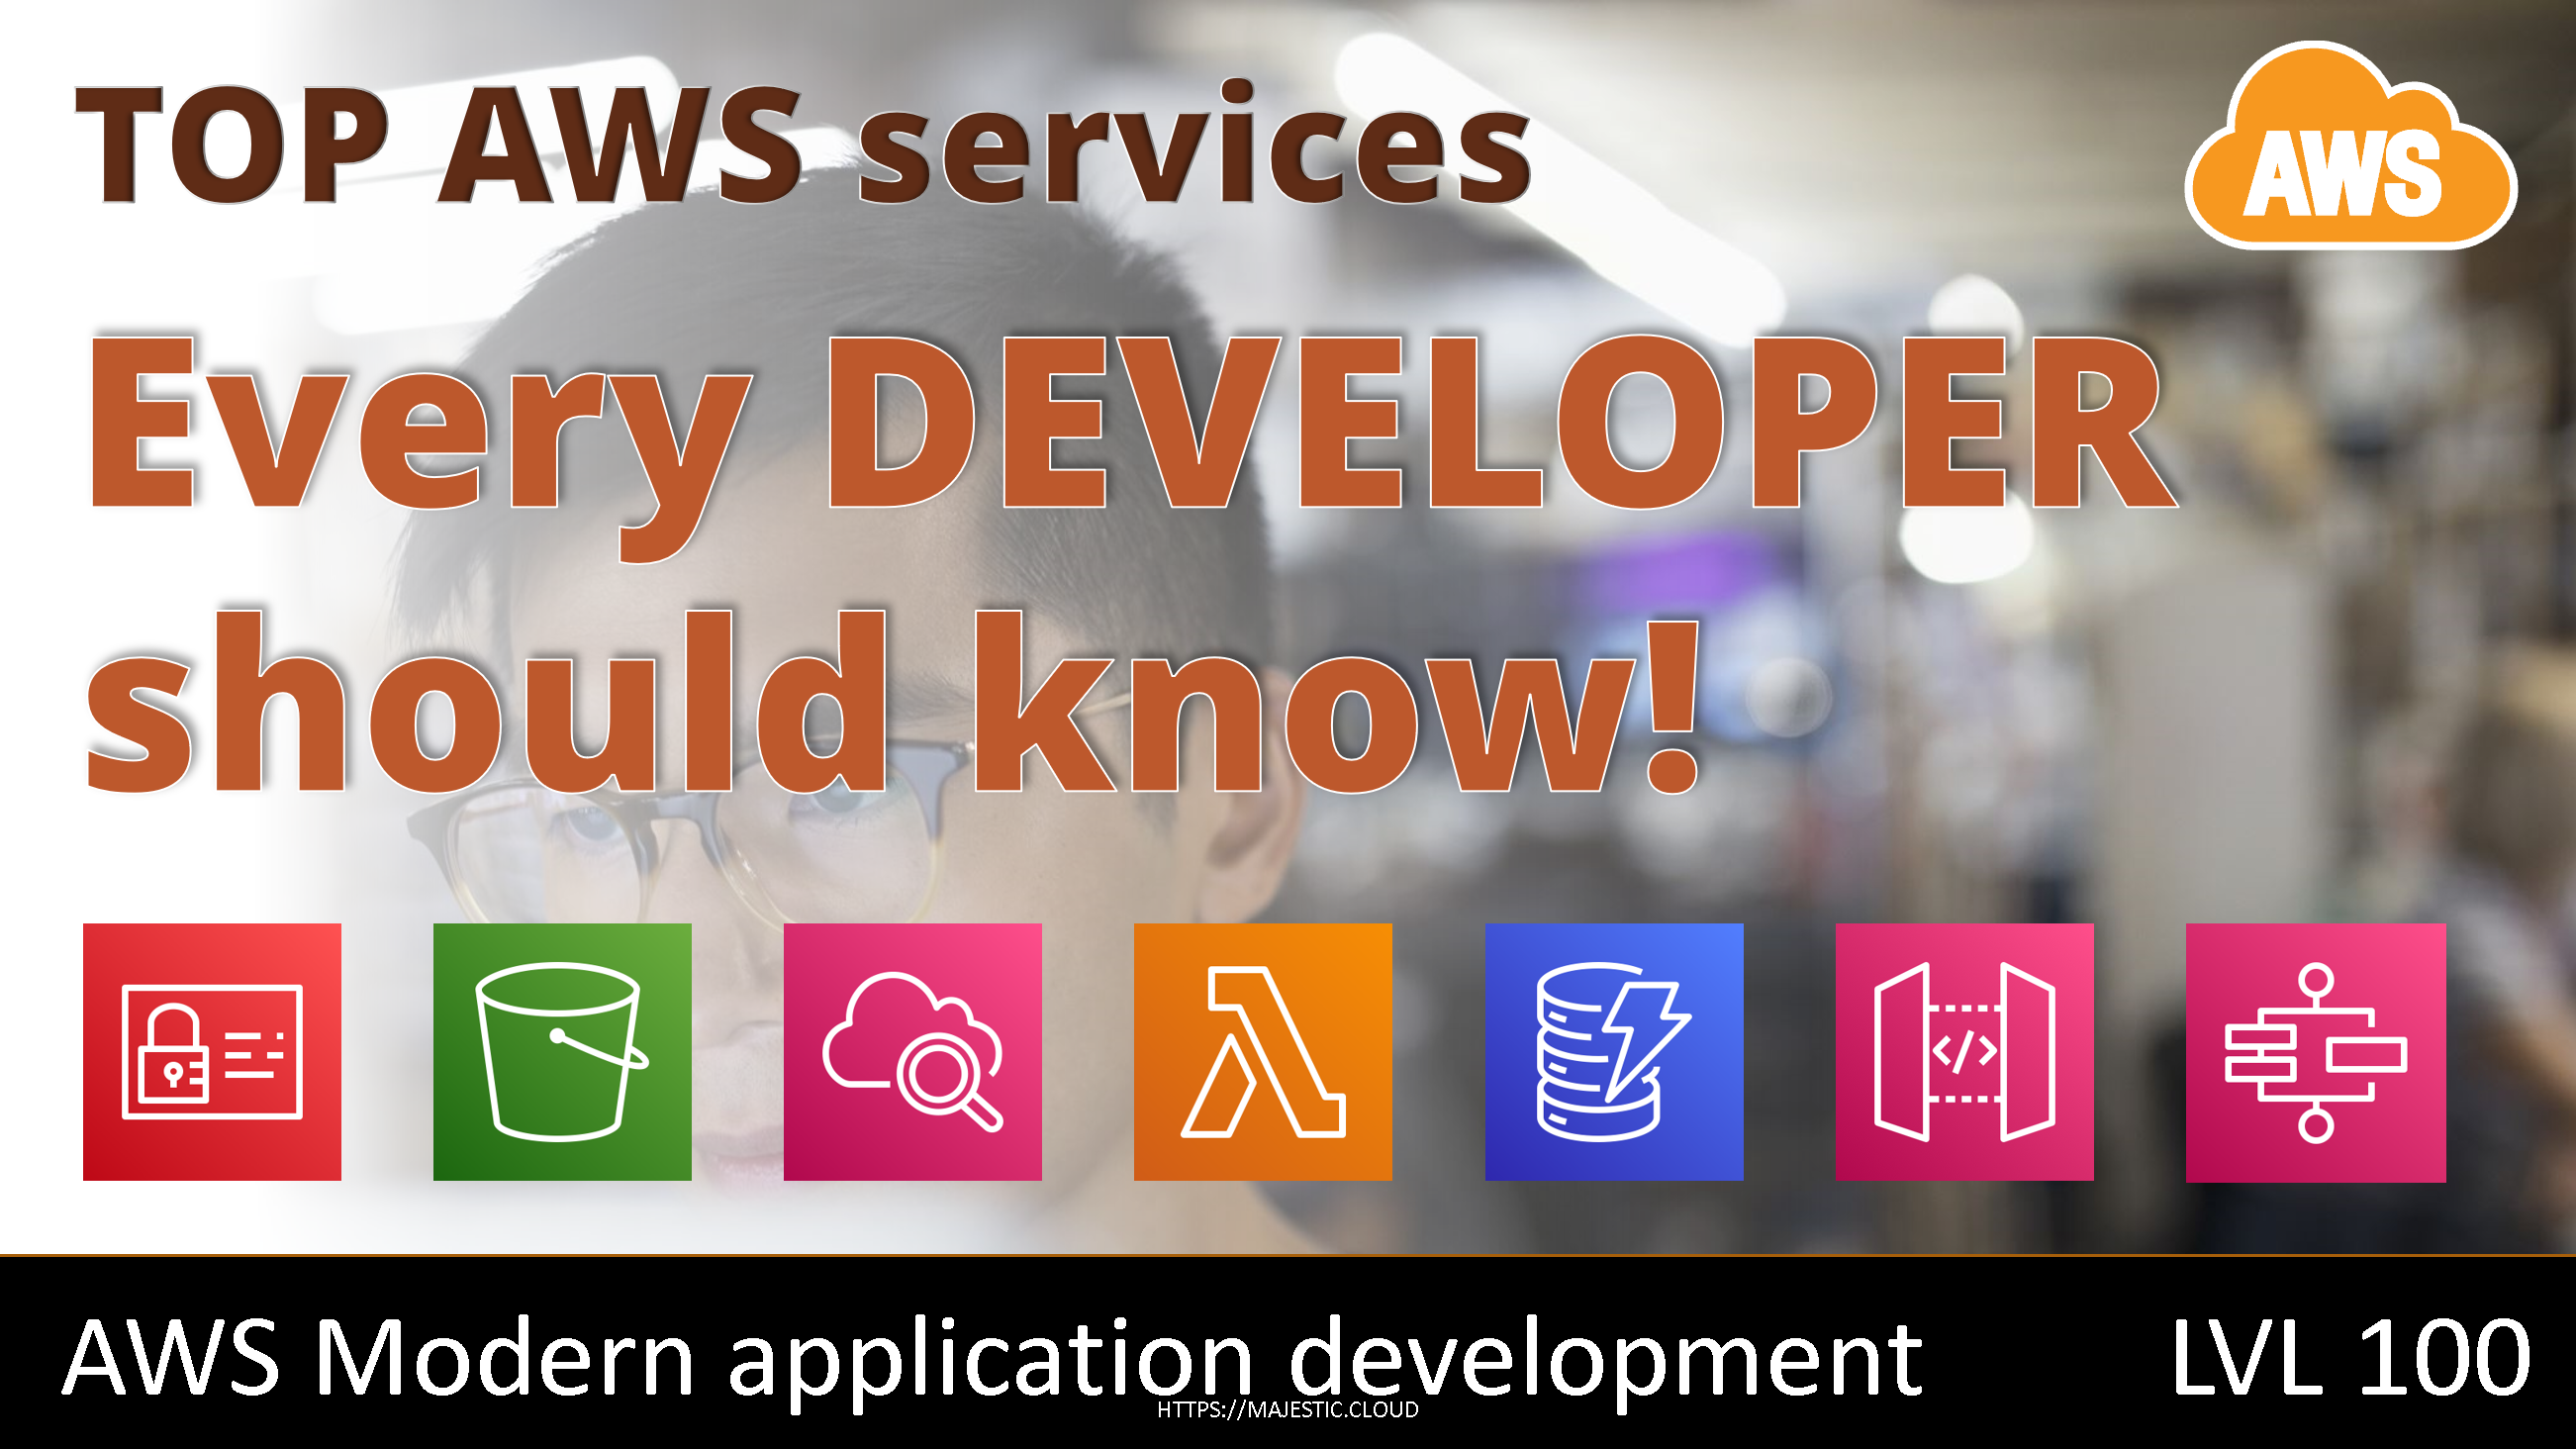 The Top AWS services every developer should know